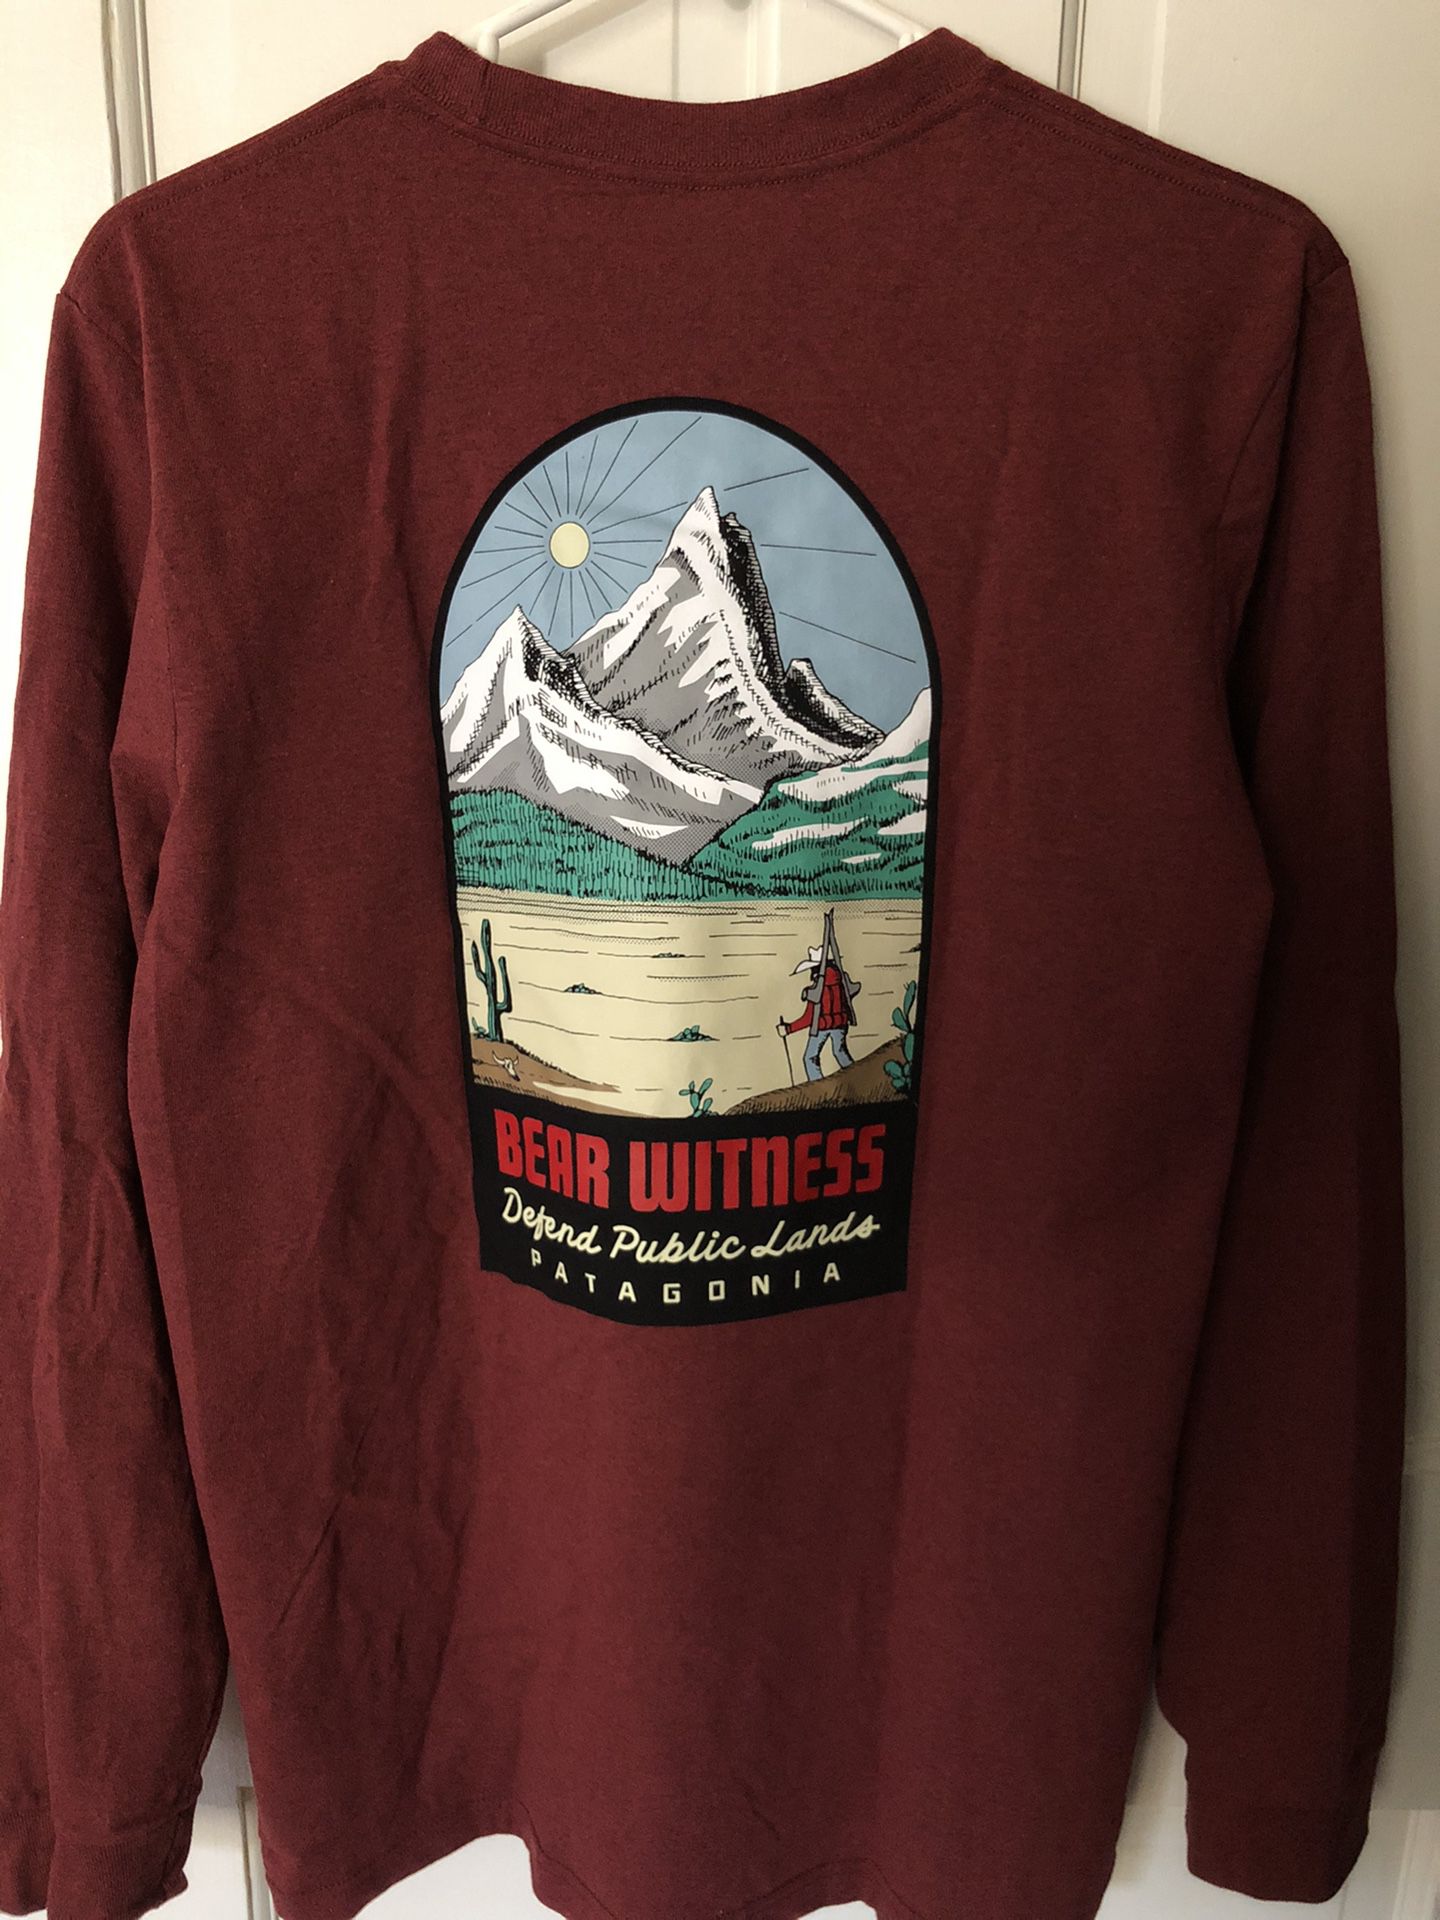 Patagonia Bear Witness Long Sleeve Special Edition Responsibili-Tee Shirt Size Small